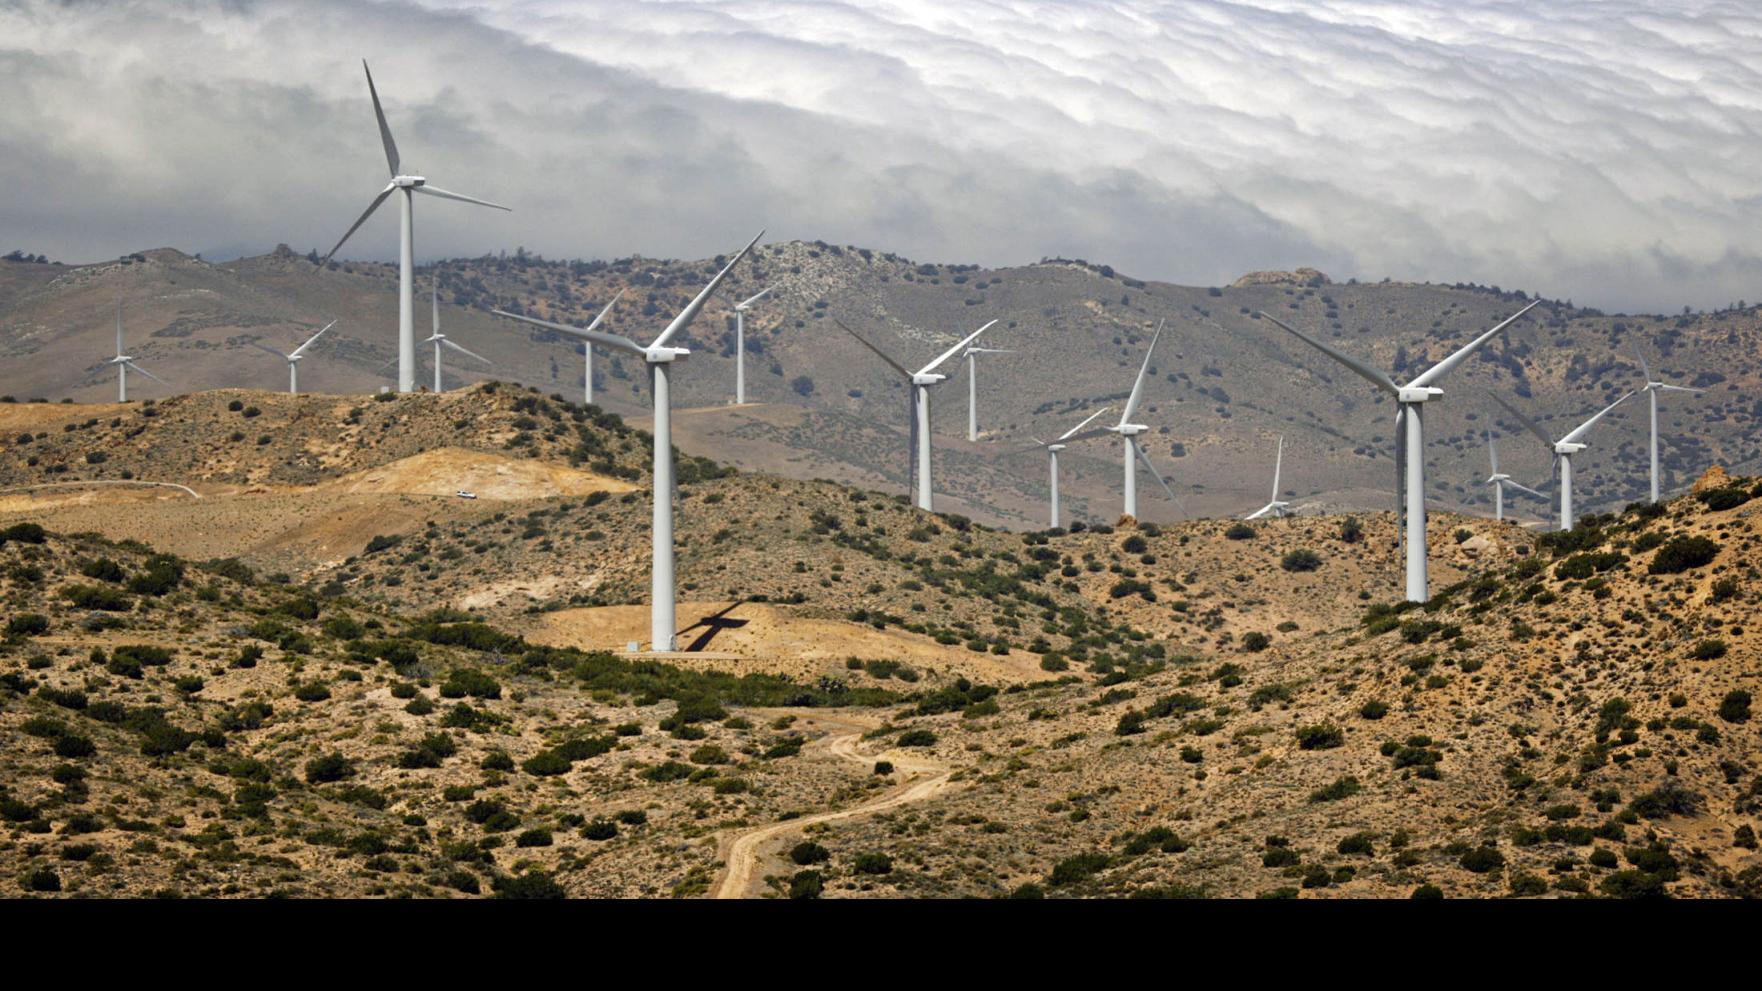 East Kern wind energy project gets OK to kill condors